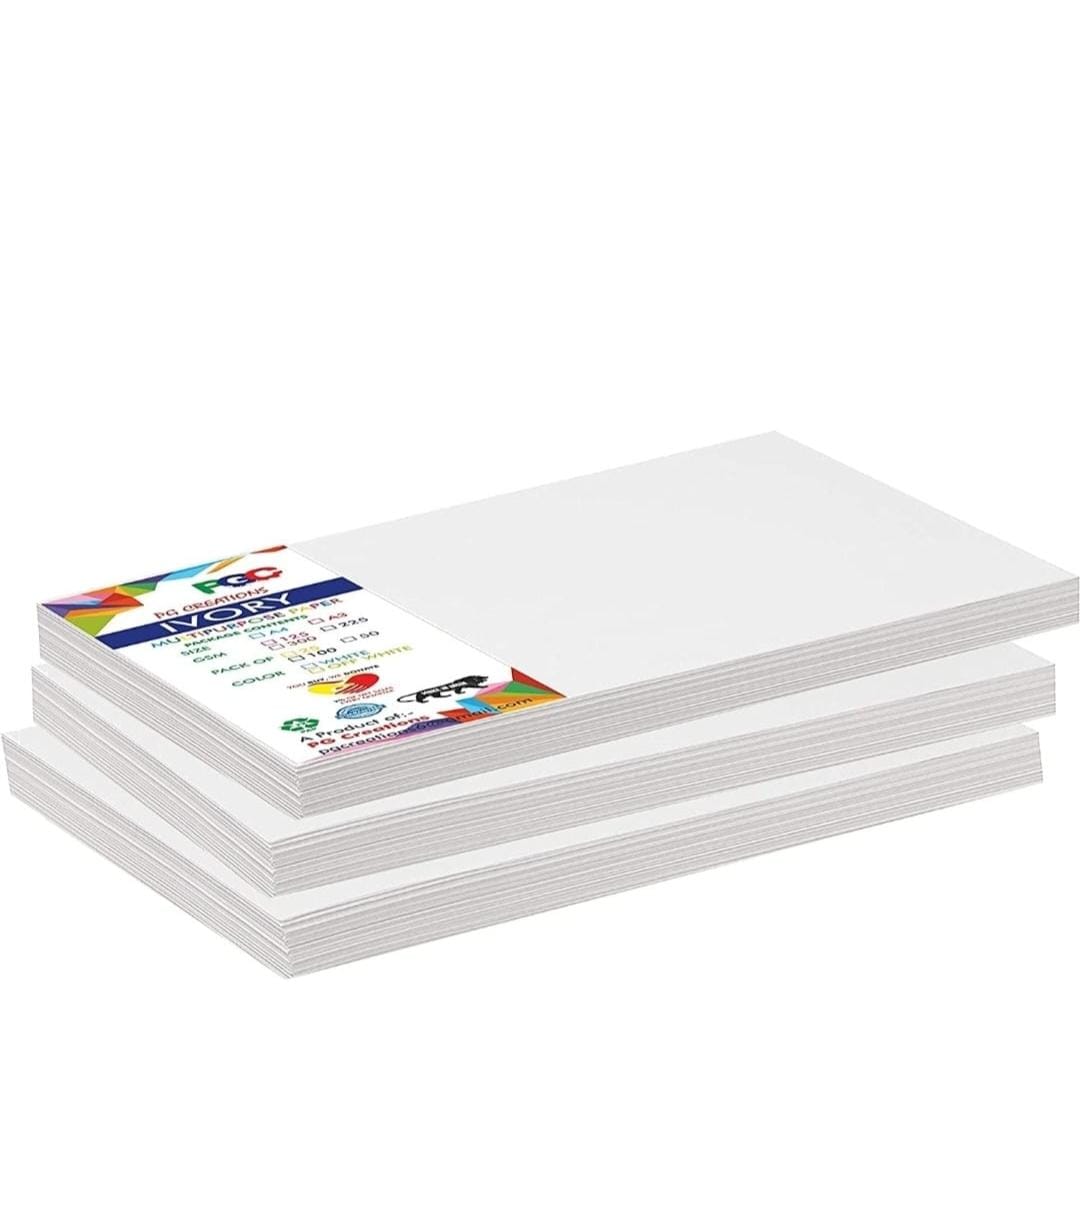 300 GSM Sheets: A4 Size (30 Sheets)